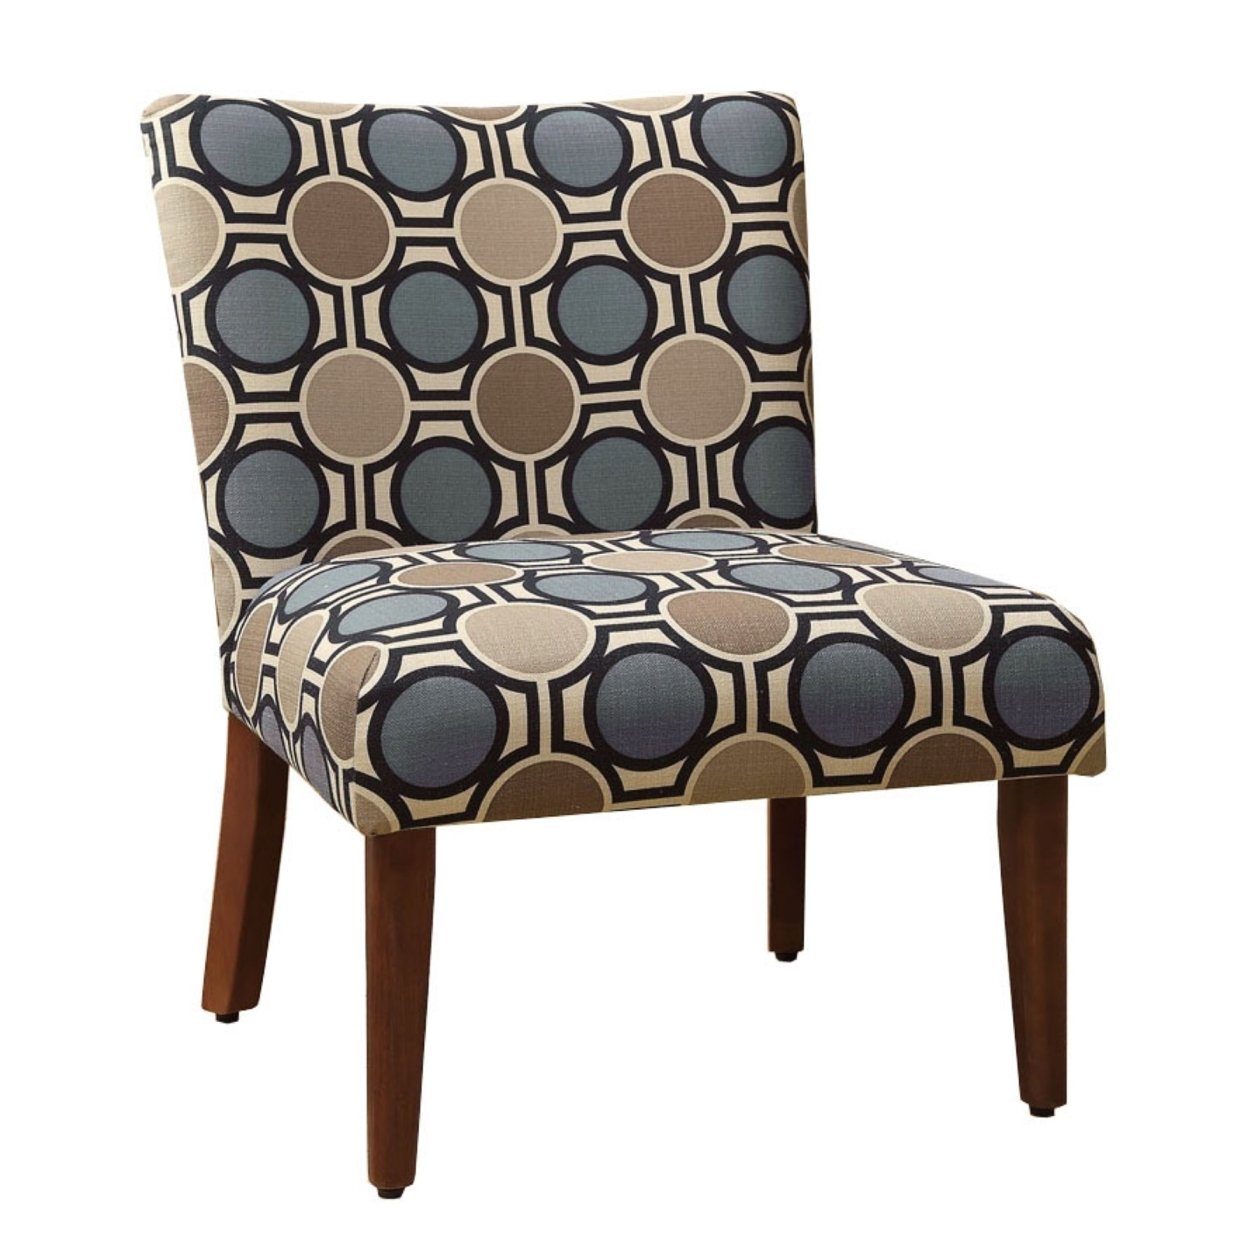 Wooden Parson Chair With Geometric Patterned Fabric Upholstered Seating, Blue And Brown- Saltoro Sherpi